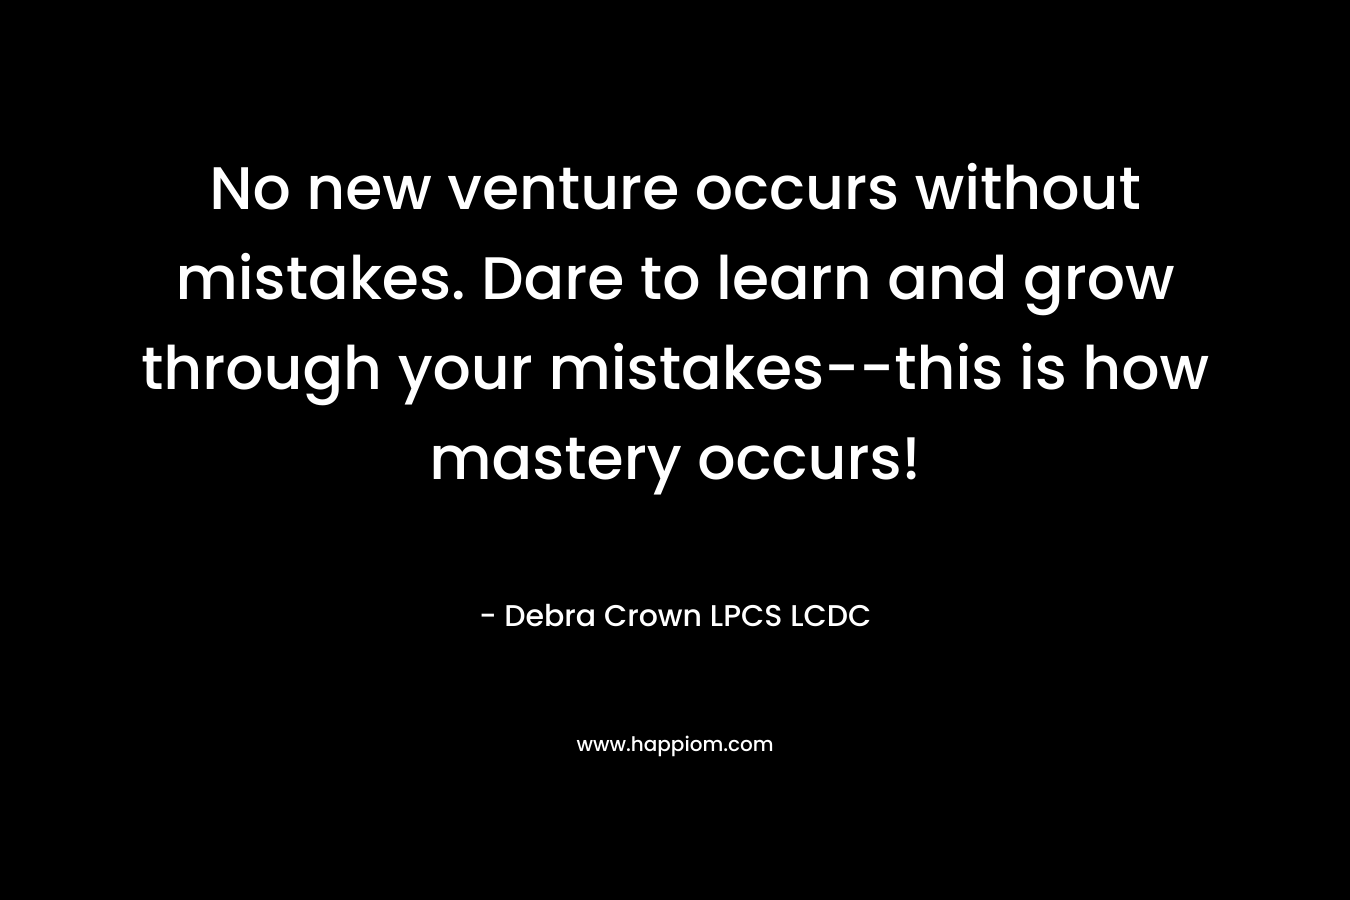 No new venture occurs without mistakes. Dare to learn and grow through your mistakes--this is how mastery occurs!